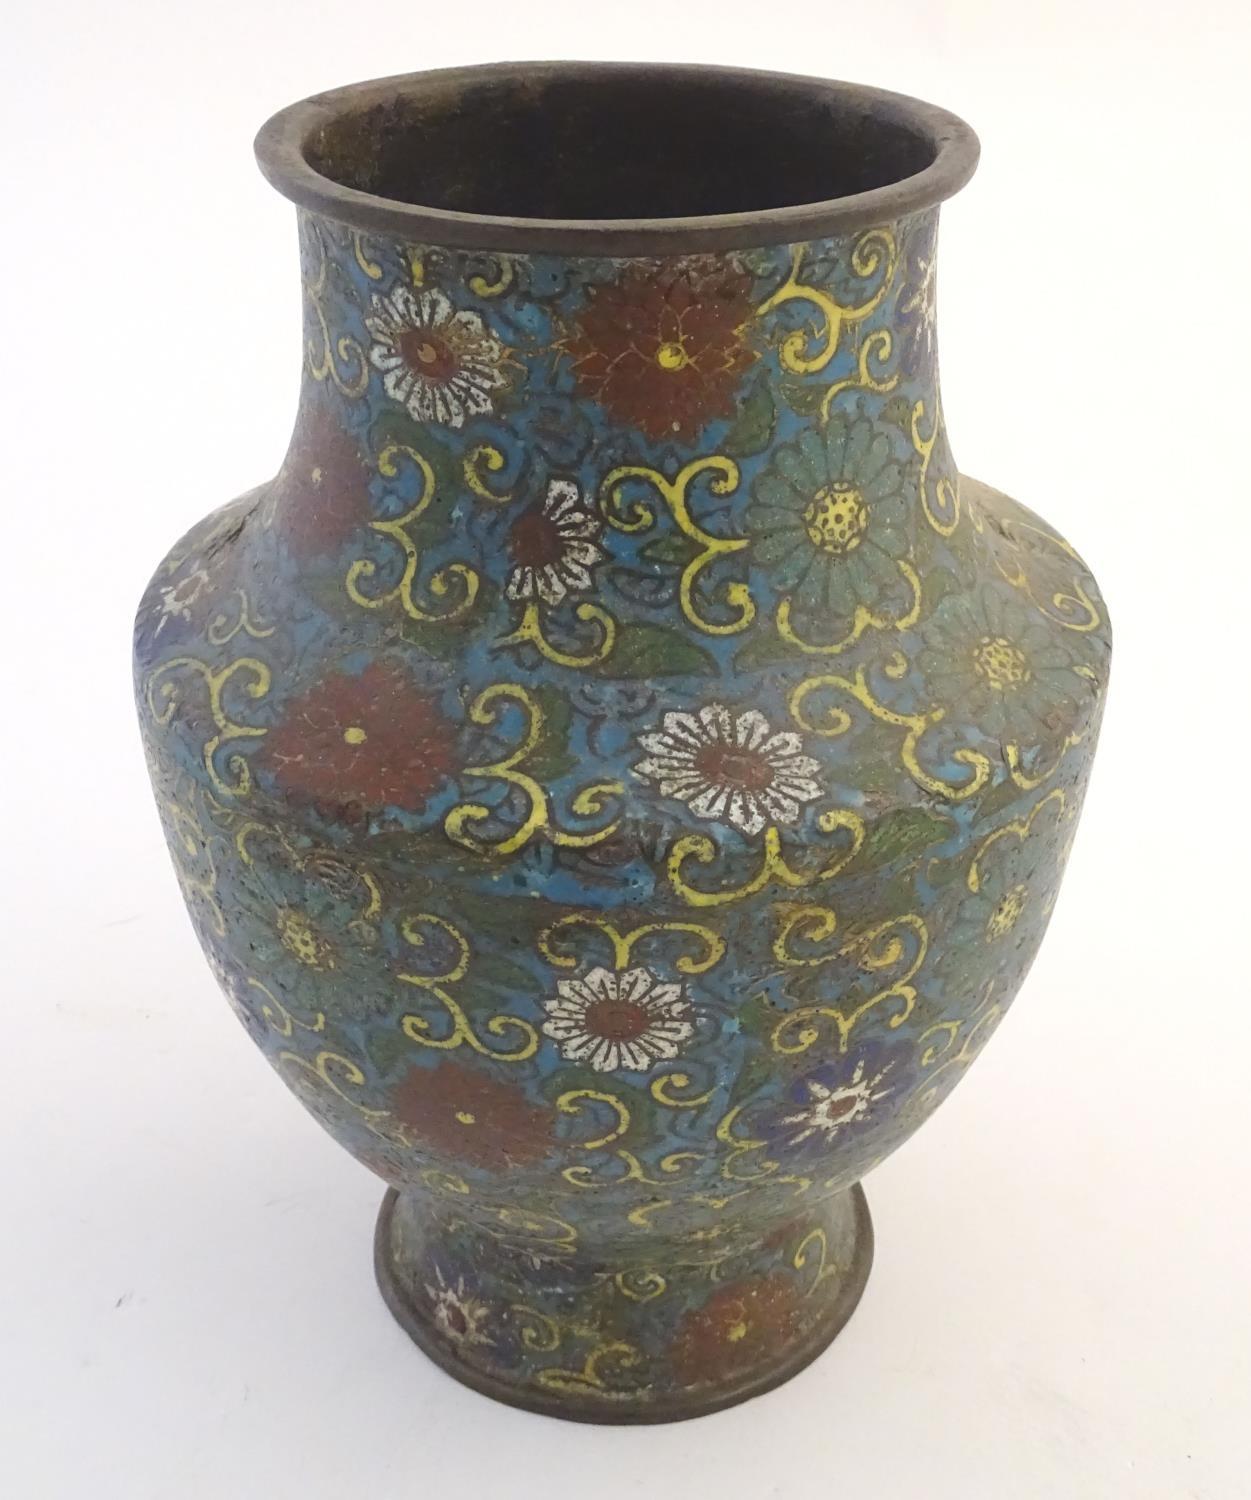 A 19th / 20thC oriental cloisonne enamel vase of baluster form with scrolling floral and foliate